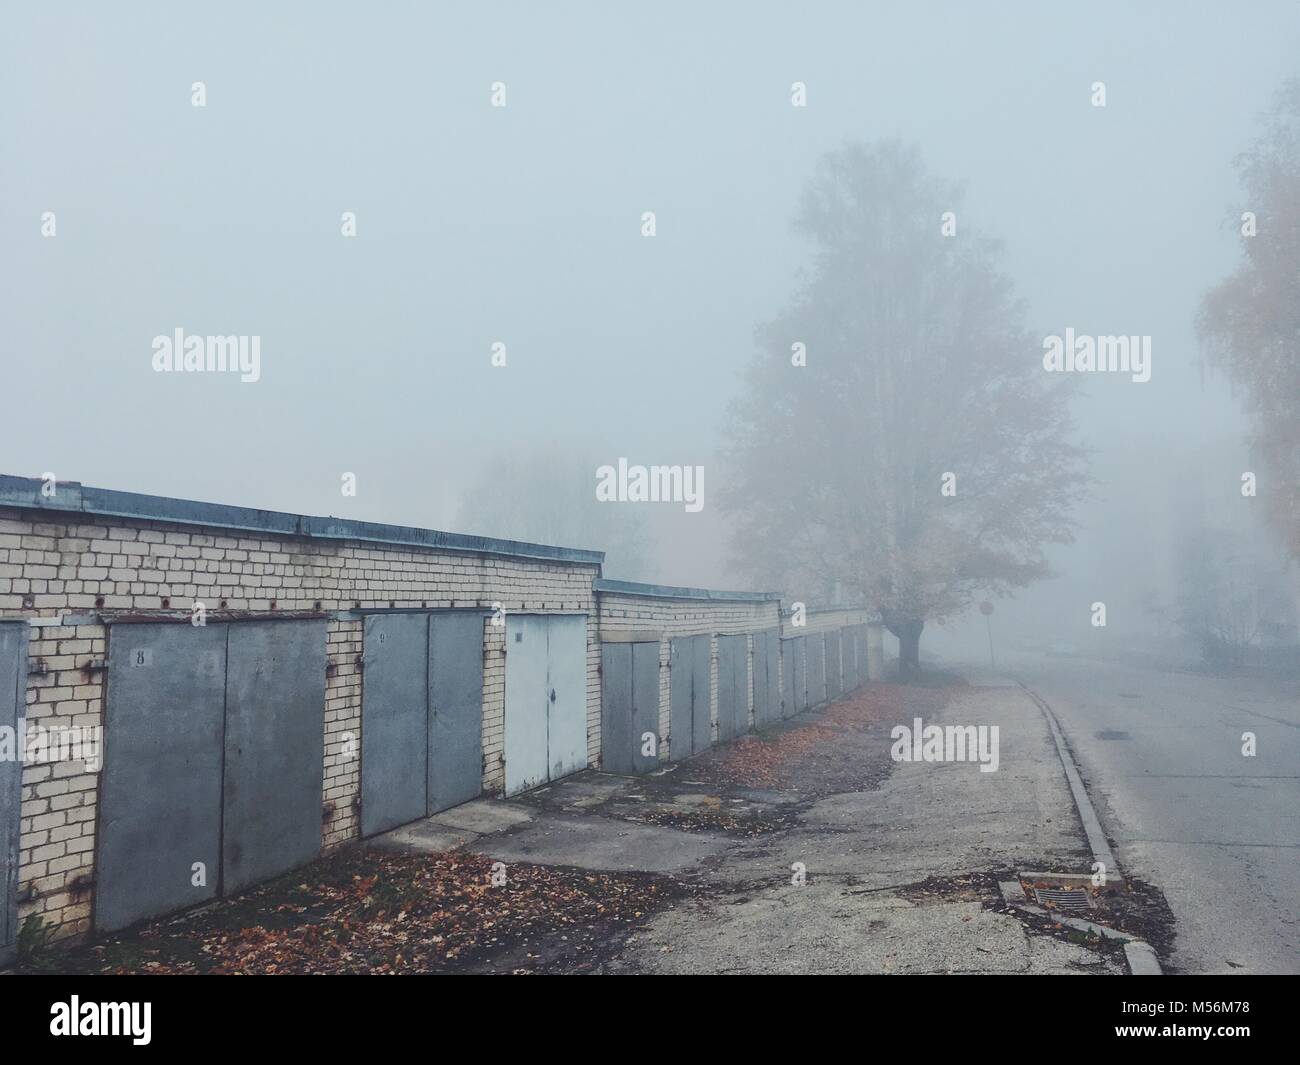 Garages in a foggy morning. City landscape. Stock Photo